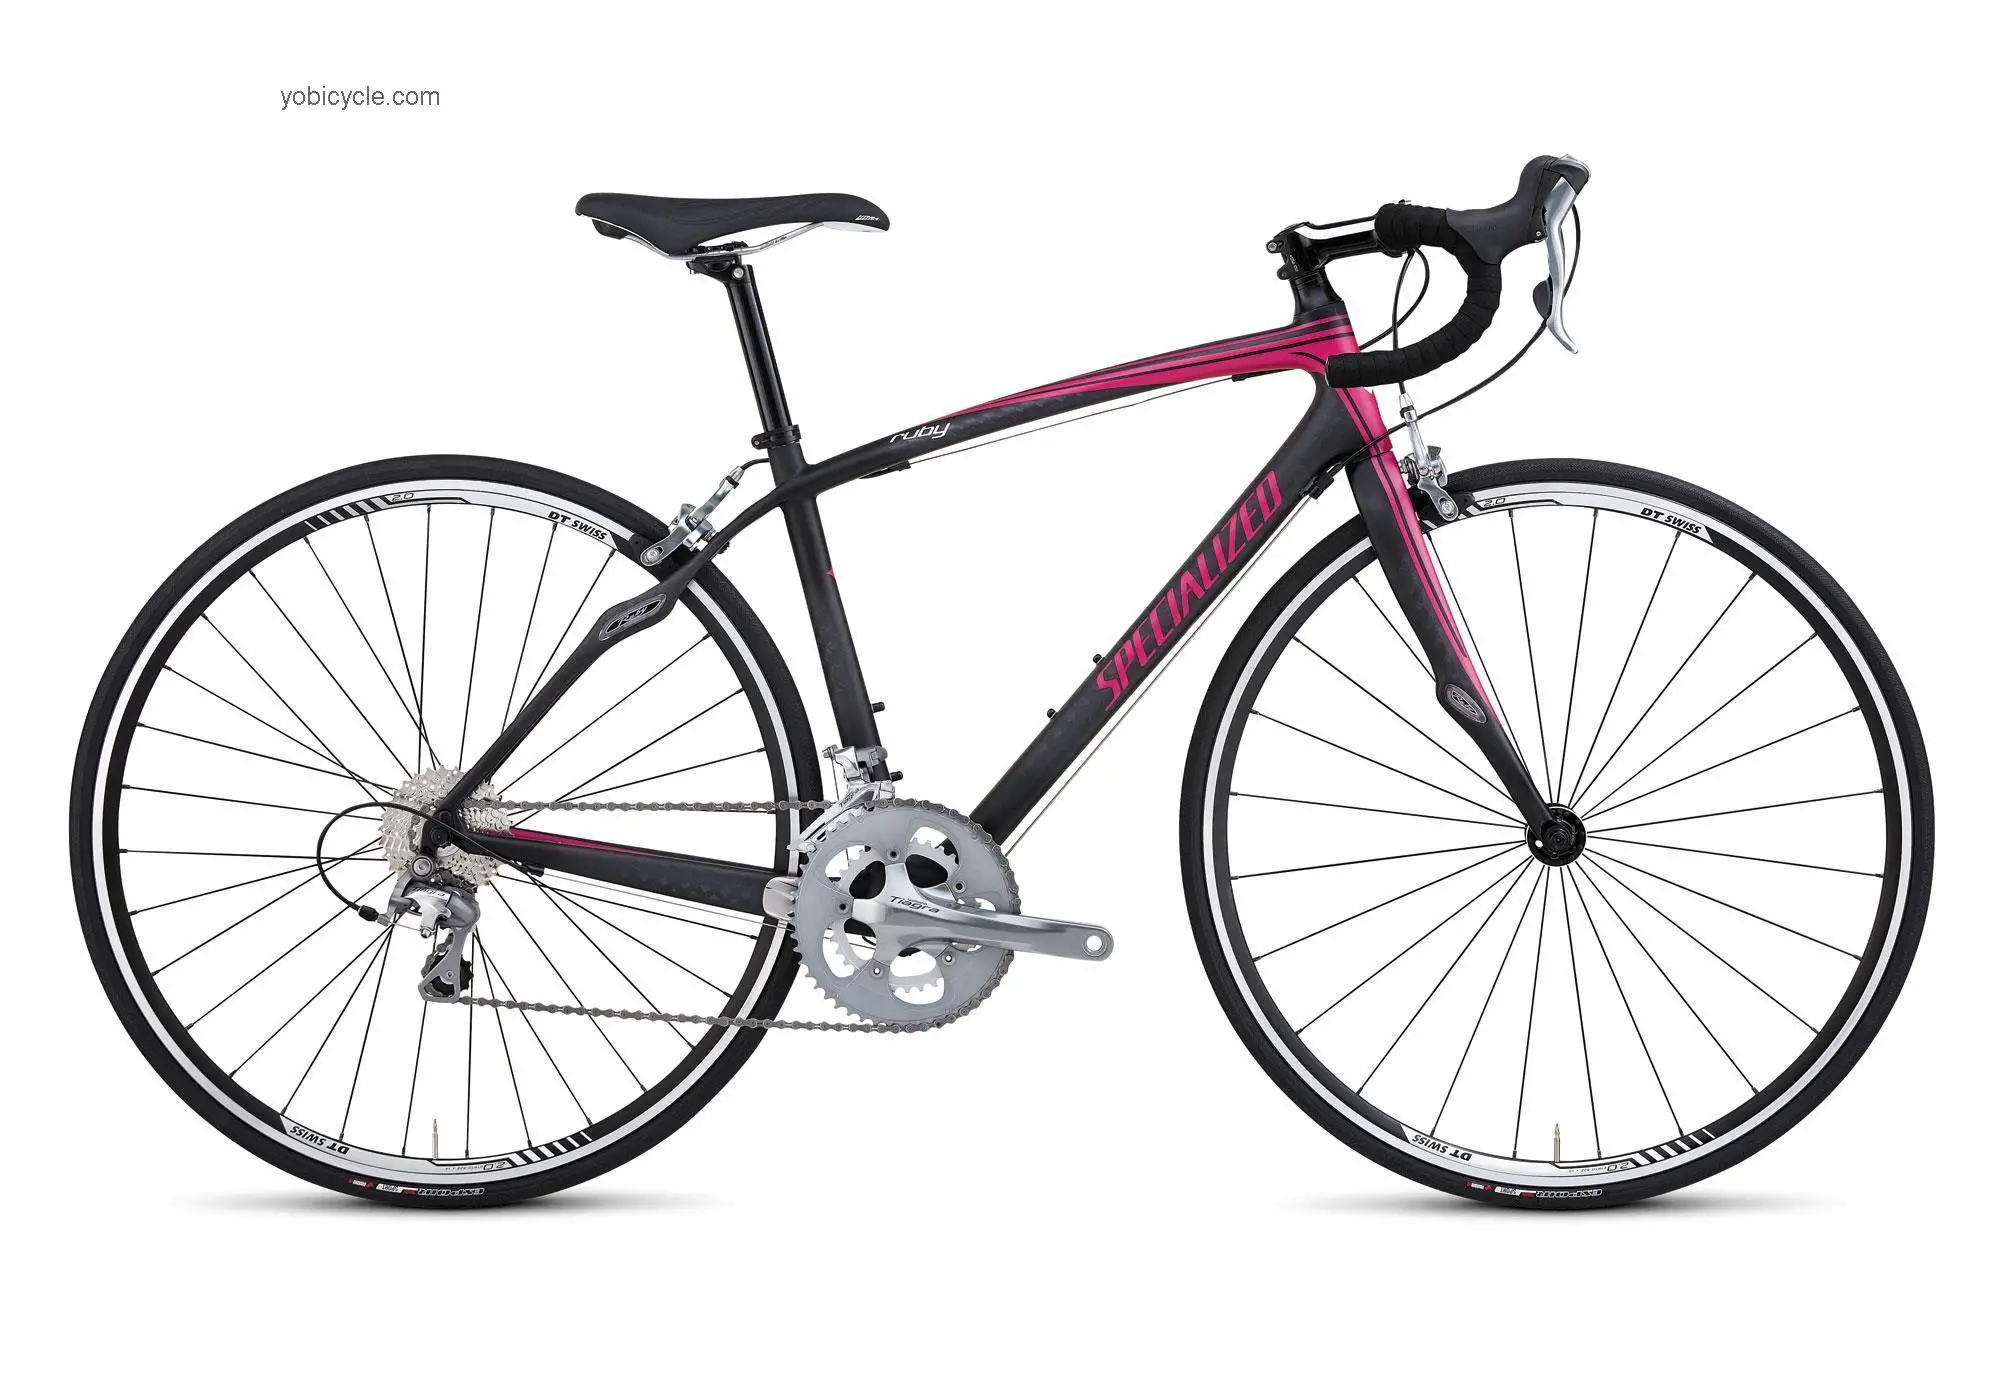 Specialized Ruby Compact 2012 comparison online with competitors